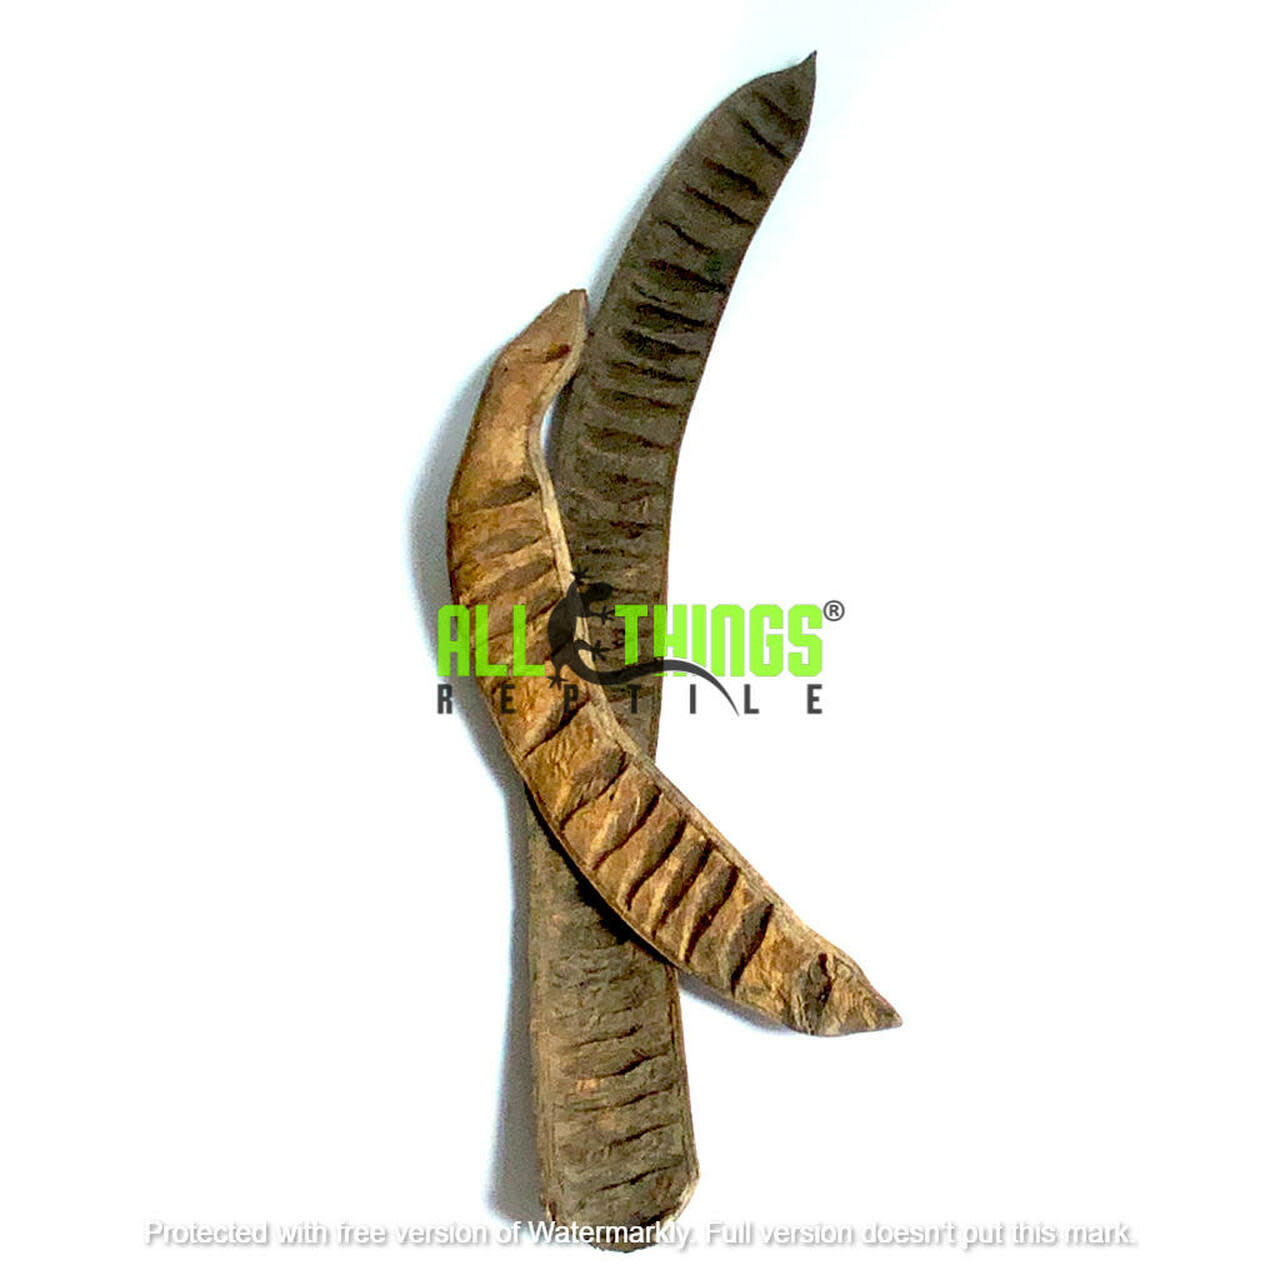 All things reptile Gousses d'arbre de mai pq 2 - May Tree Pods 2-pack